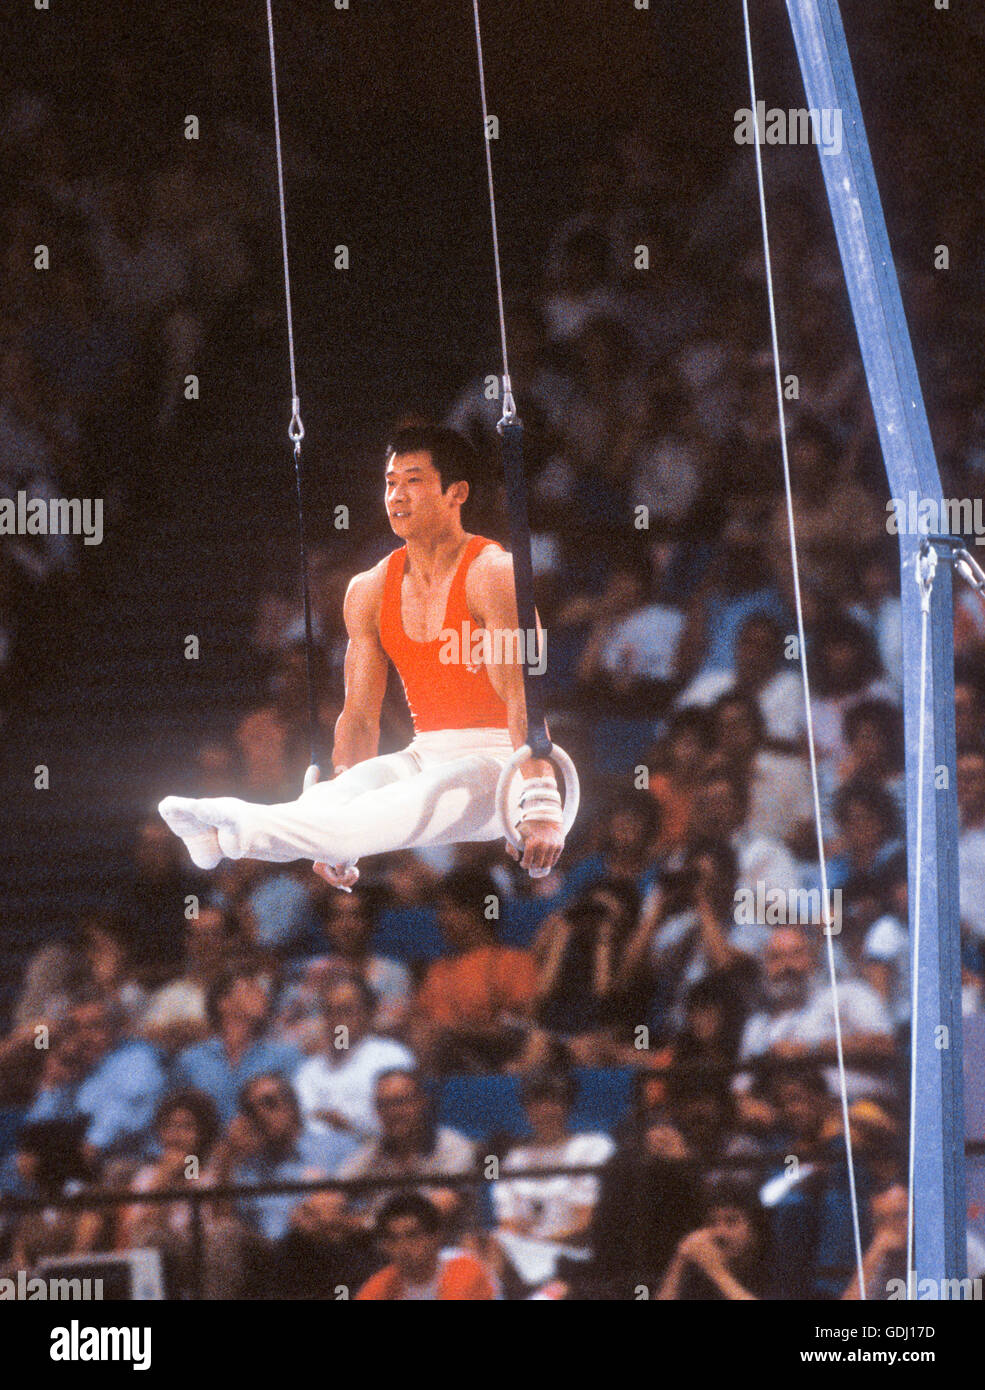 Fei Tong of China performs on rings during men's gymnastics competition at 1984 Olympic Games in Los Angeles. Stock Photo